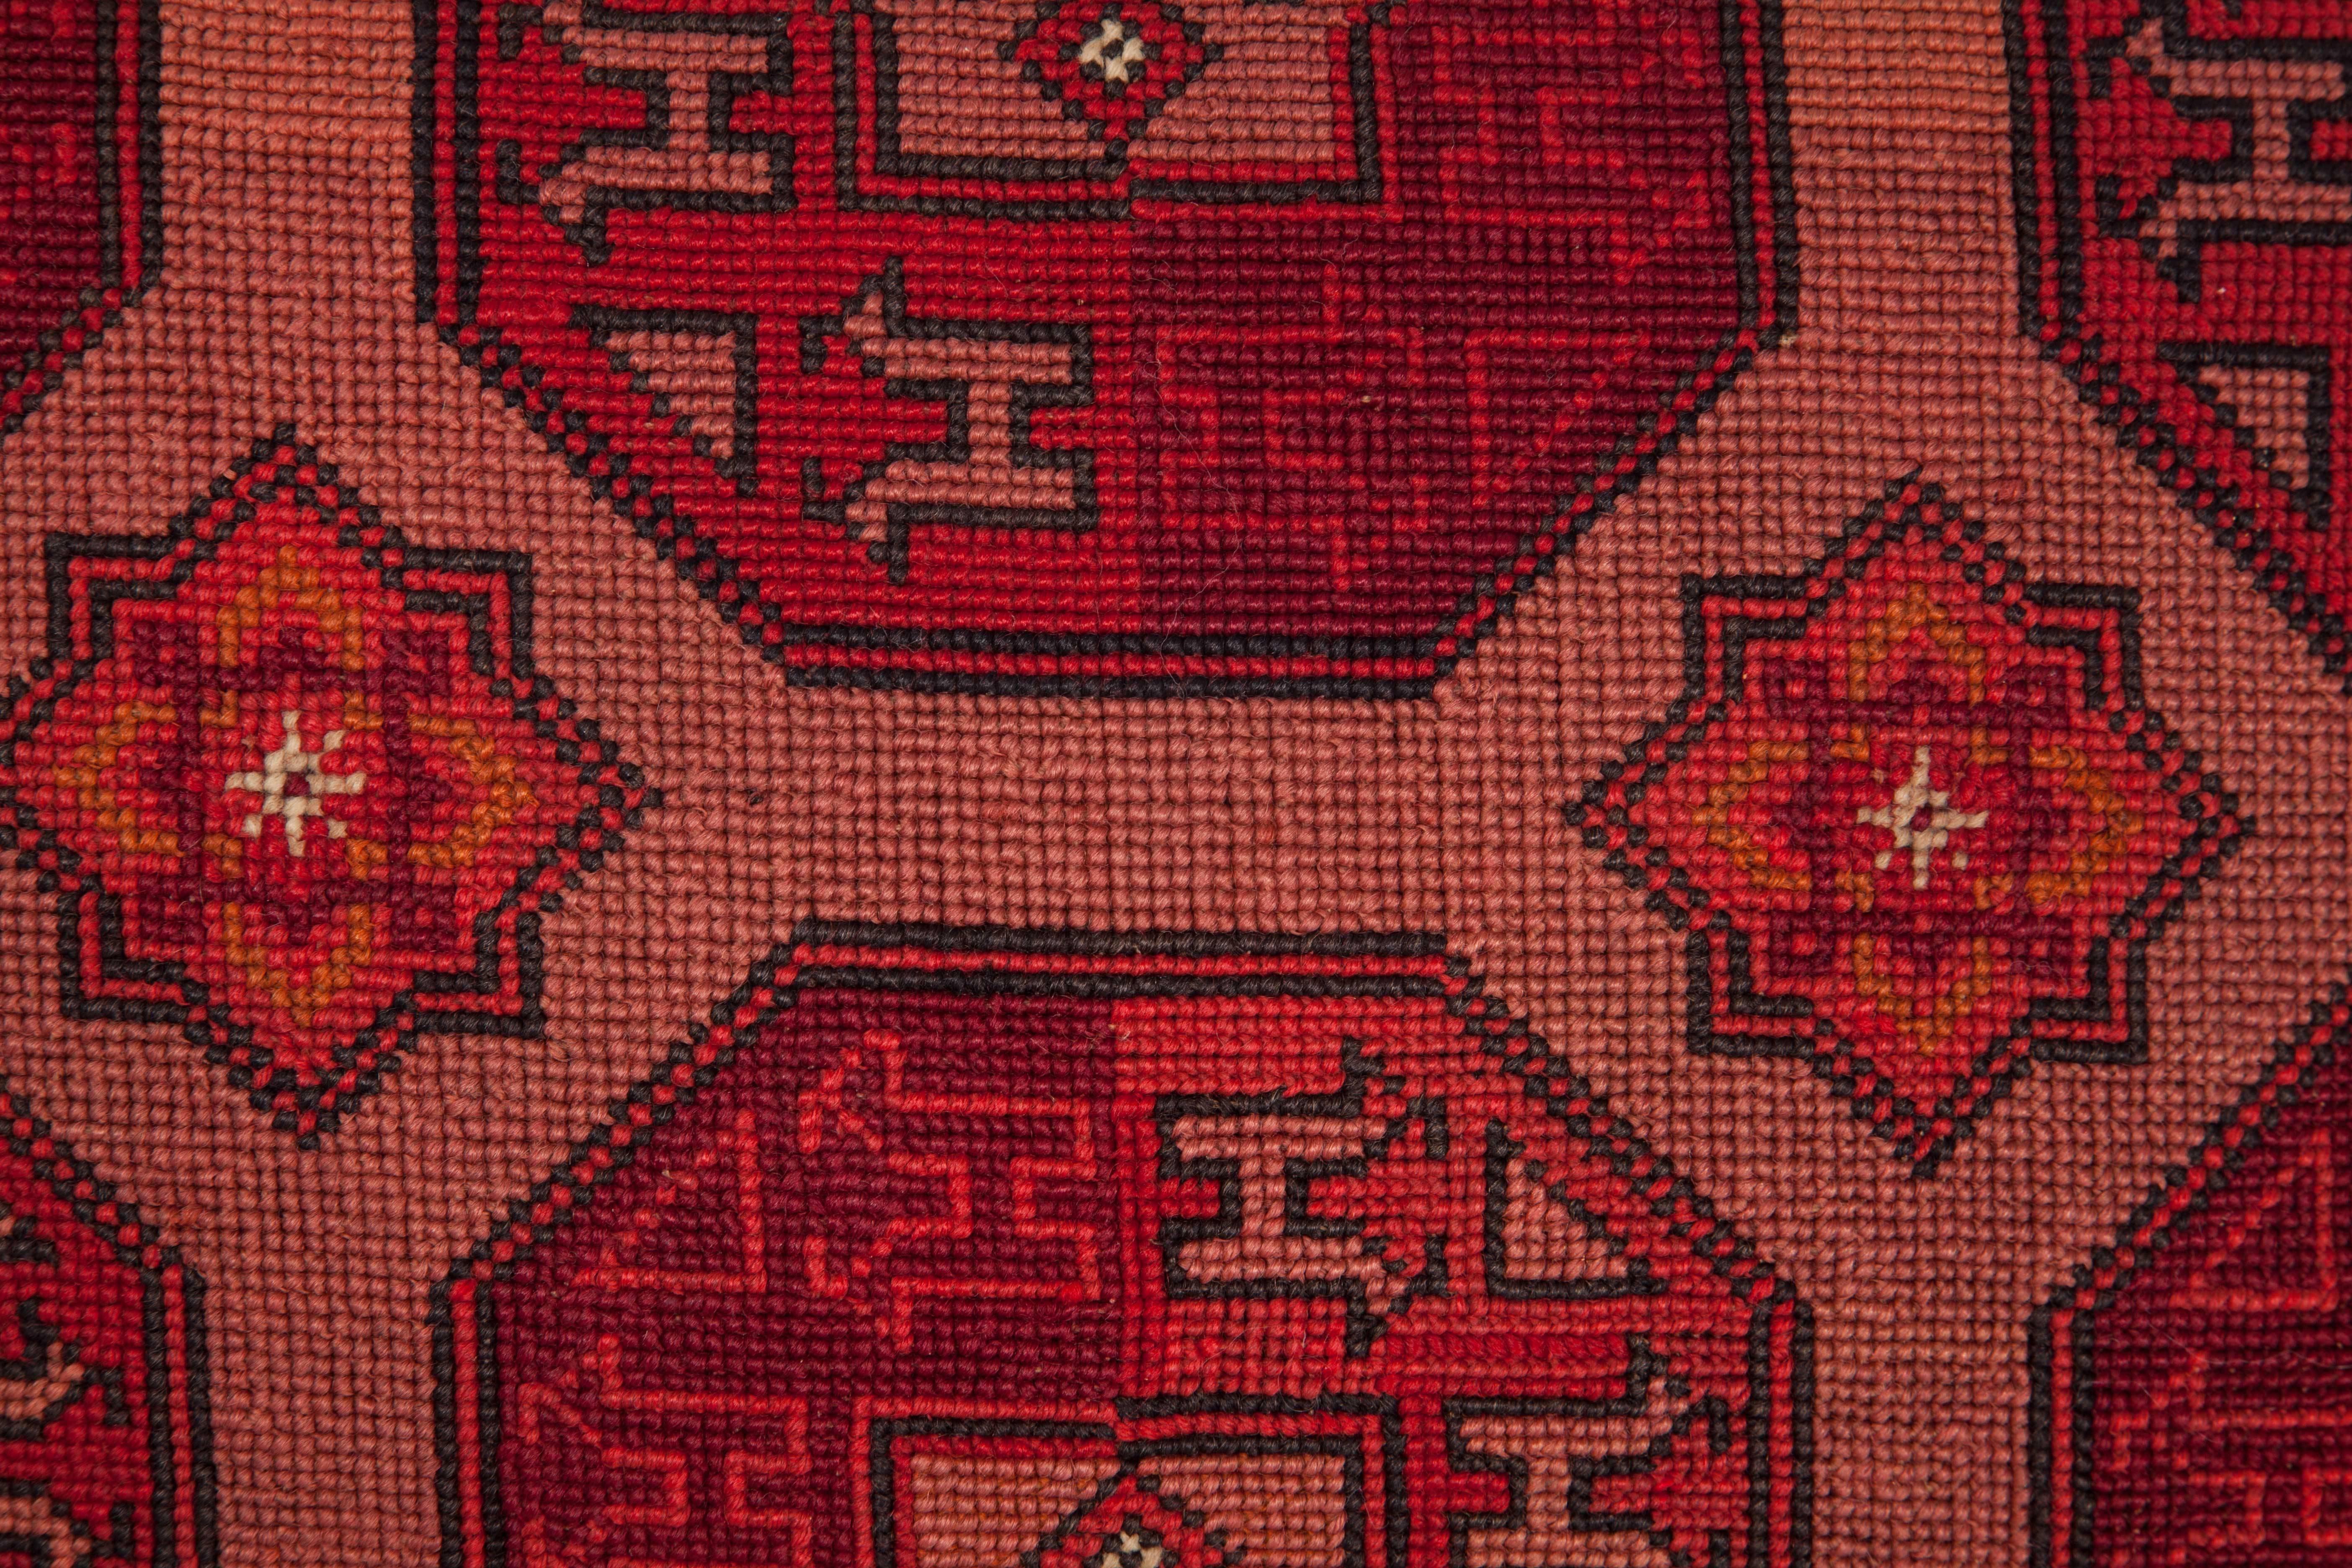 Embroidered Pillow Made Out of an Early 20th Century Central Asian Cross Stitch Embroidery